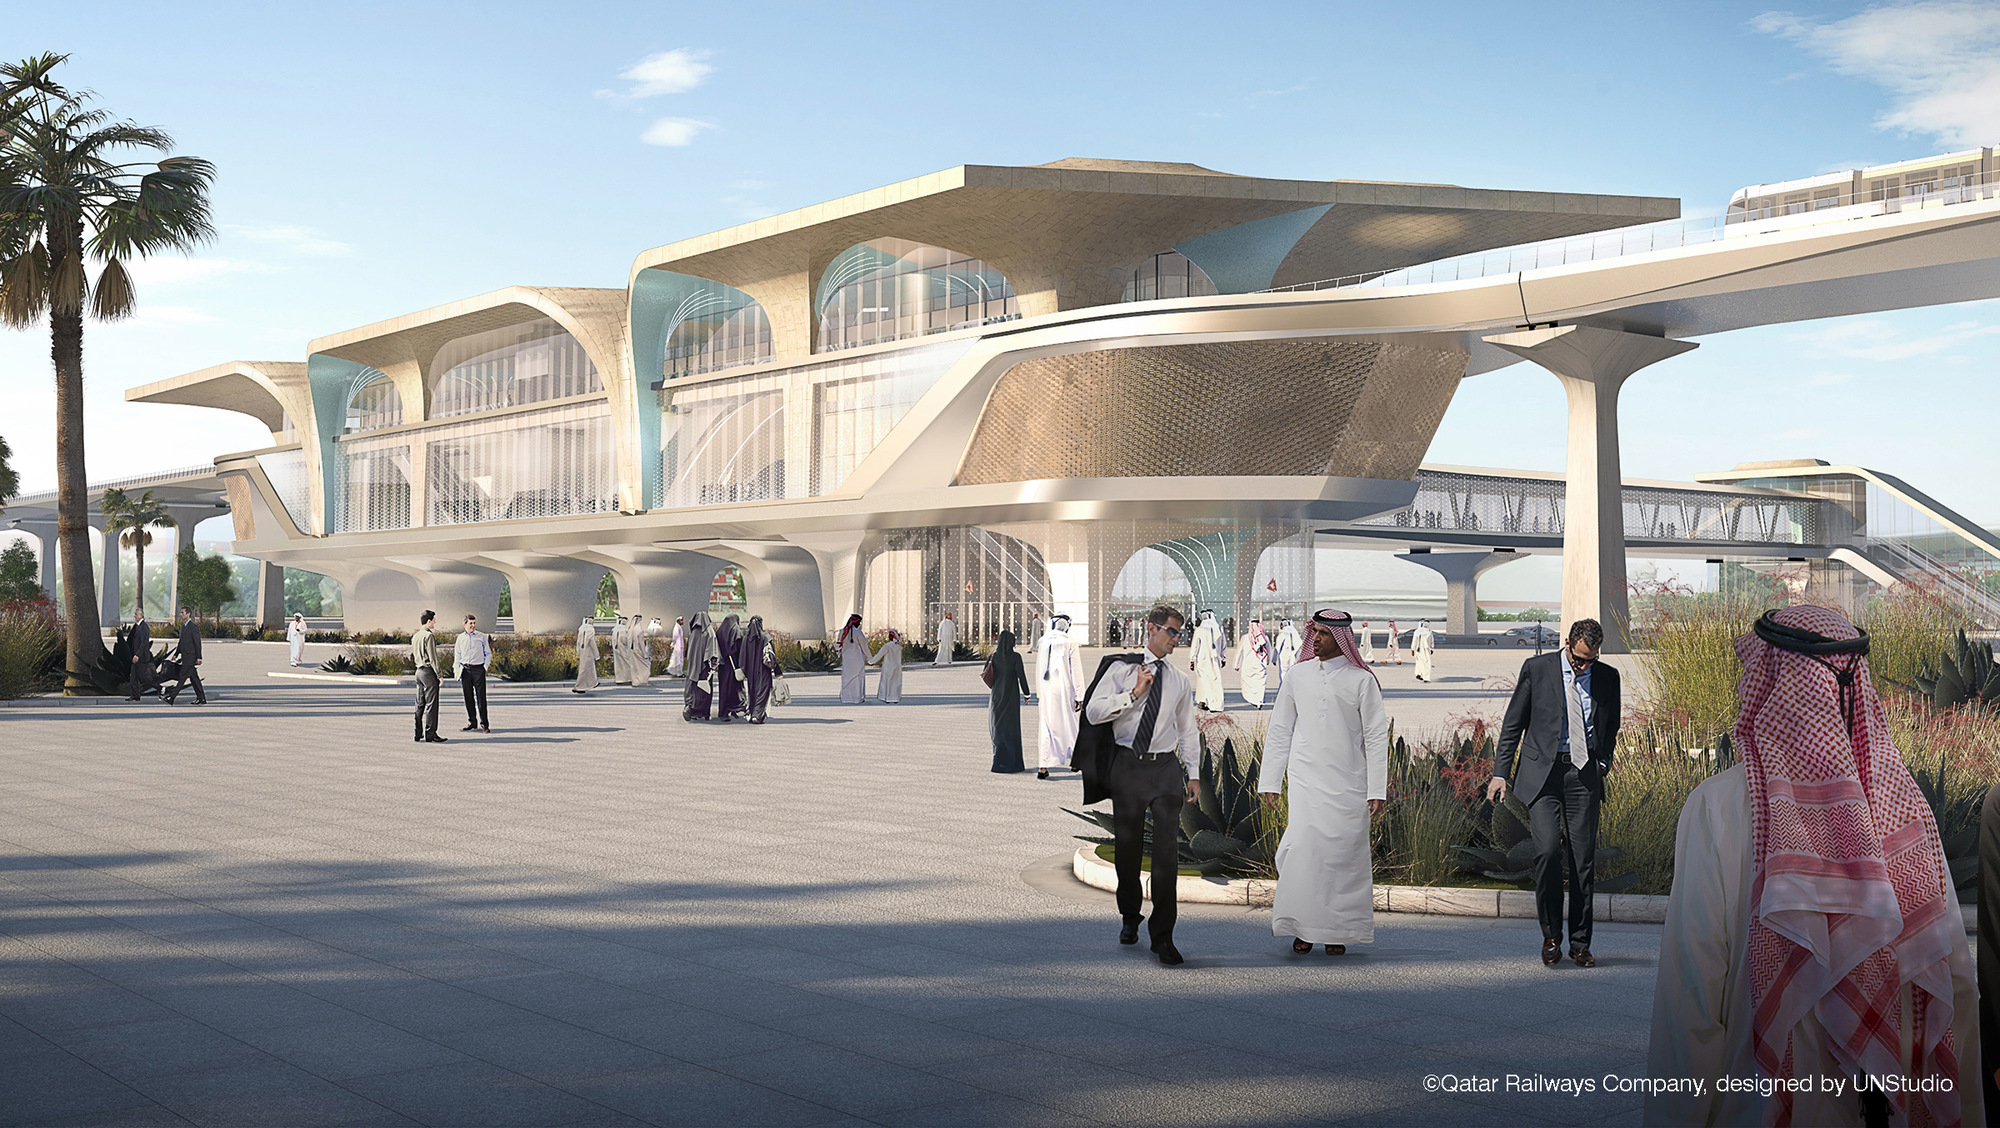 UNStudio designs over 30 stations in the first phase of the Doha Metro Network